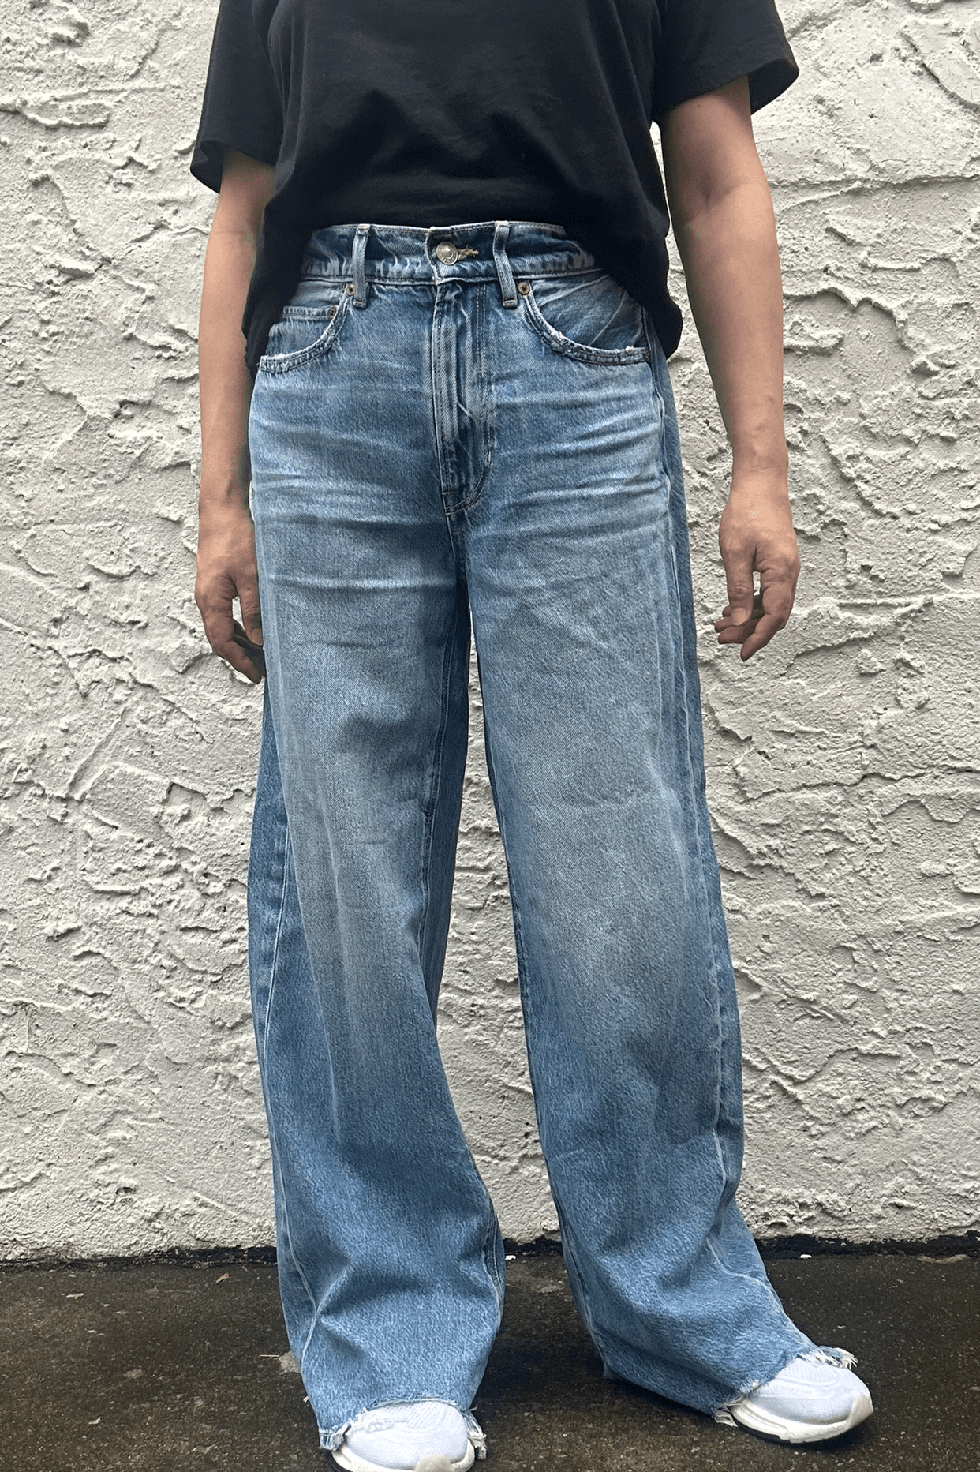 Wide-leg jeans for women 5 foot tall and under - Petite Dressing